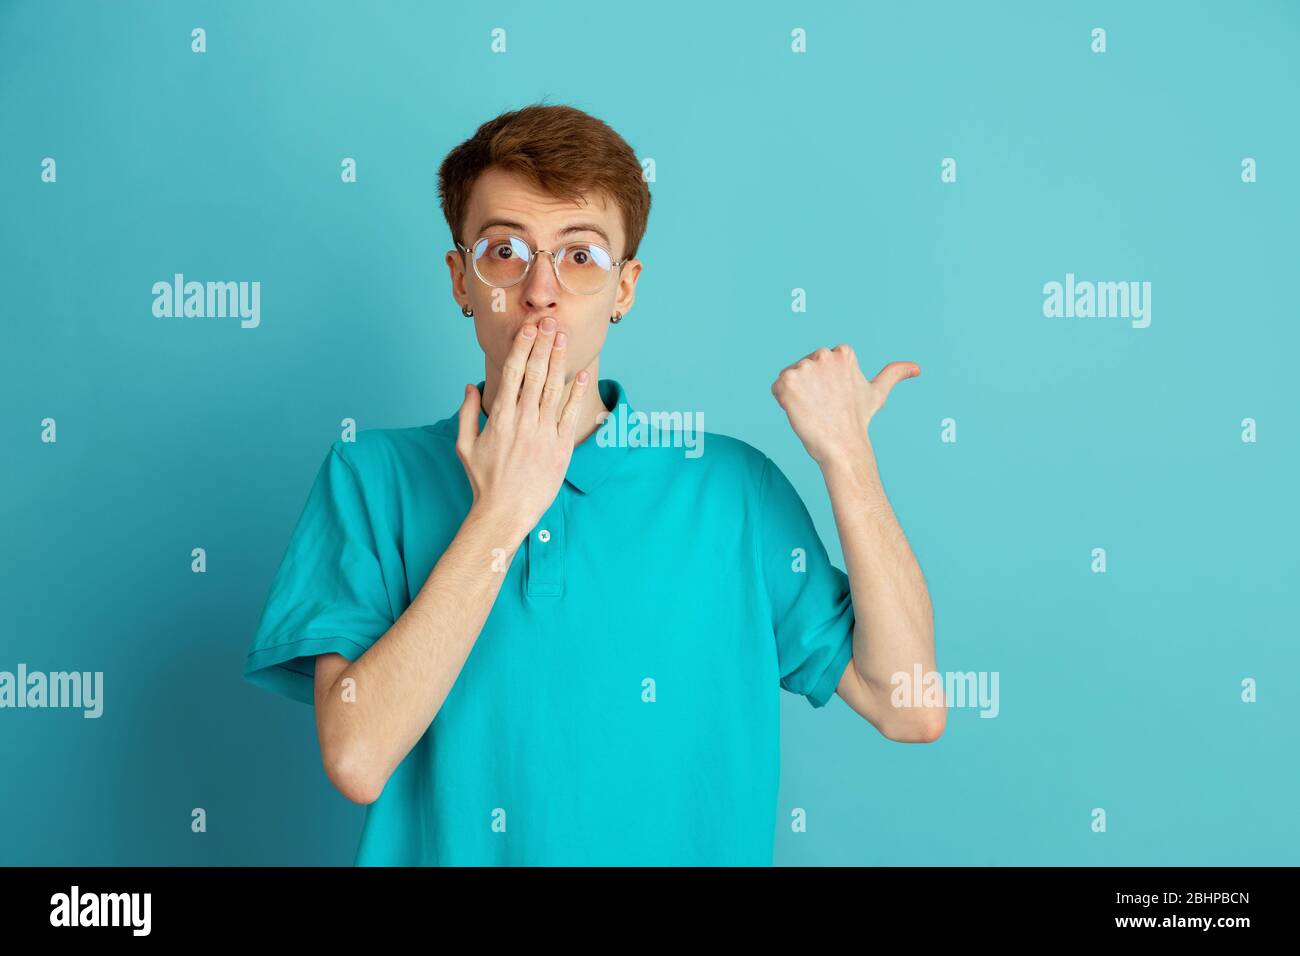 Pointing at side. Caucasian young man's modern portrait isolated on blue studio background, monochrome. Beautiful male model. Concept of human emotions, facial expression, sales, ad, trendy. Stock Photo